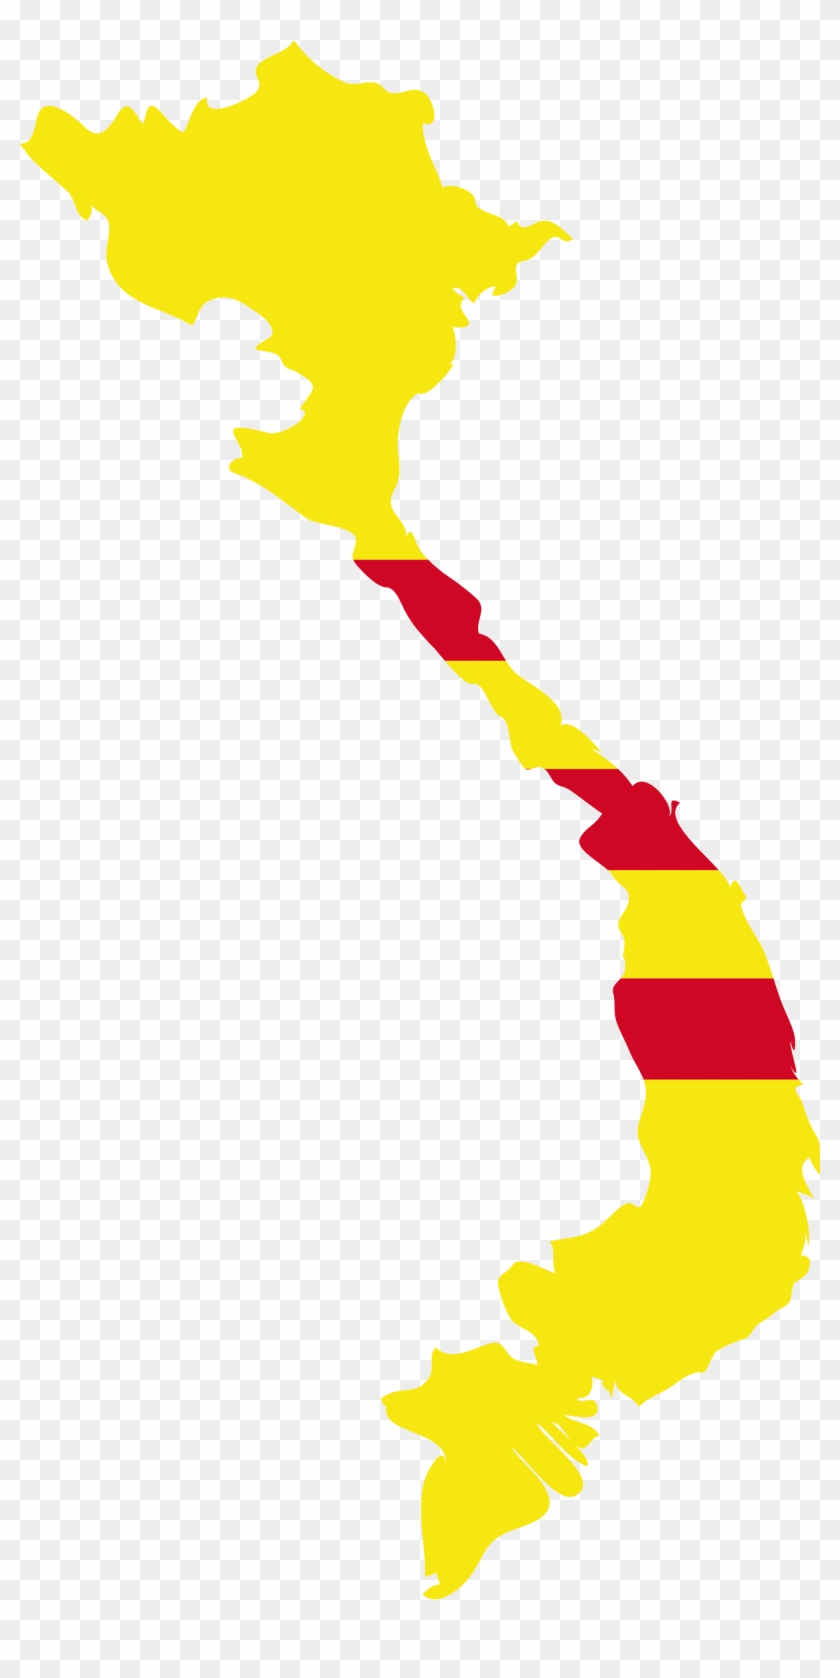 Flag Map Of The State Of Vietnam - Flag Map Of Vietnam #345103